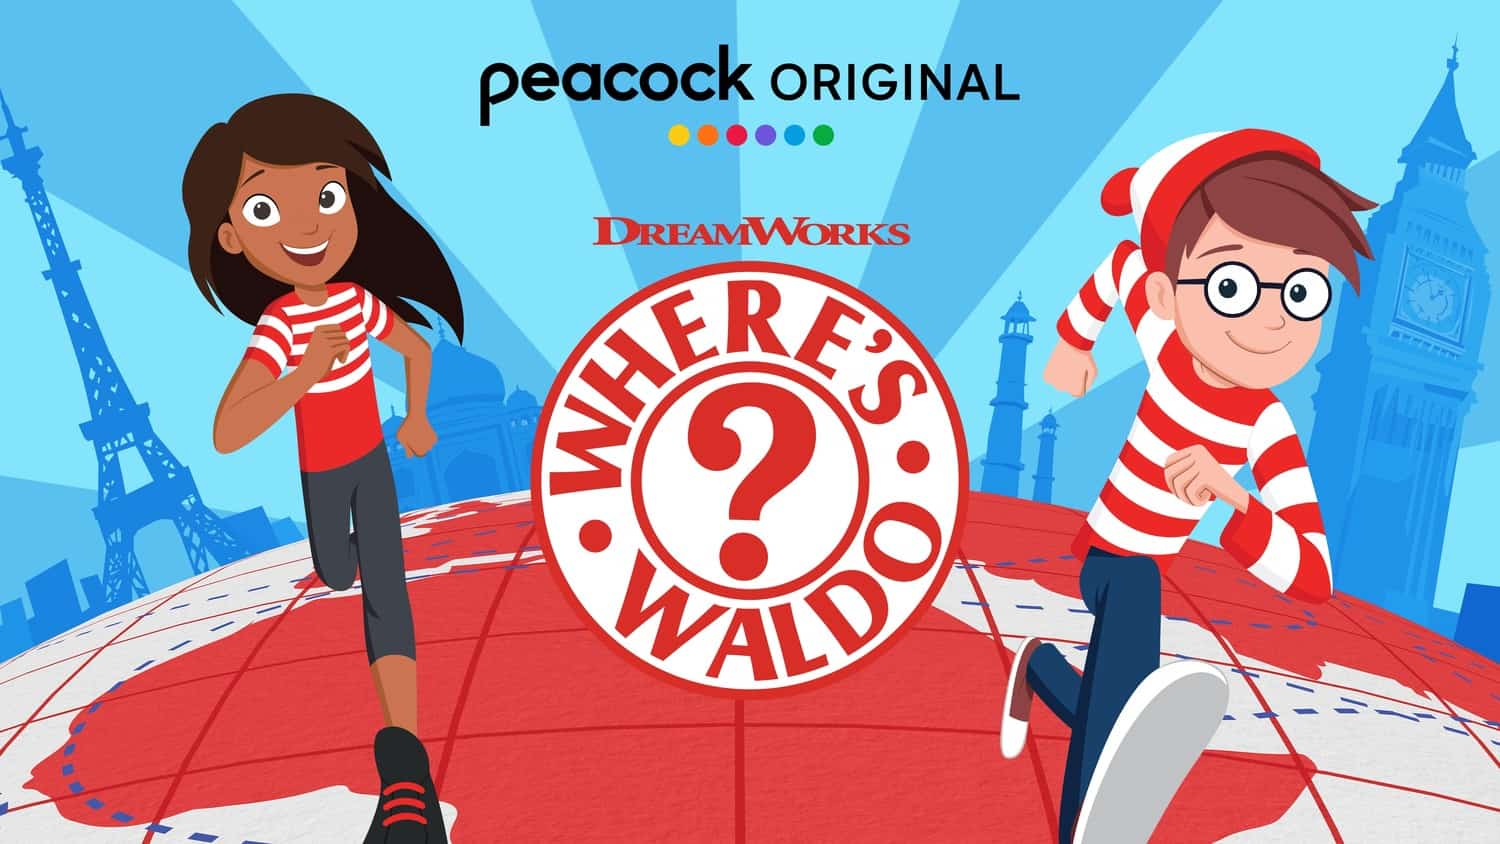  “Where’s Waldo?” promo image from DreamWorks Animated Television